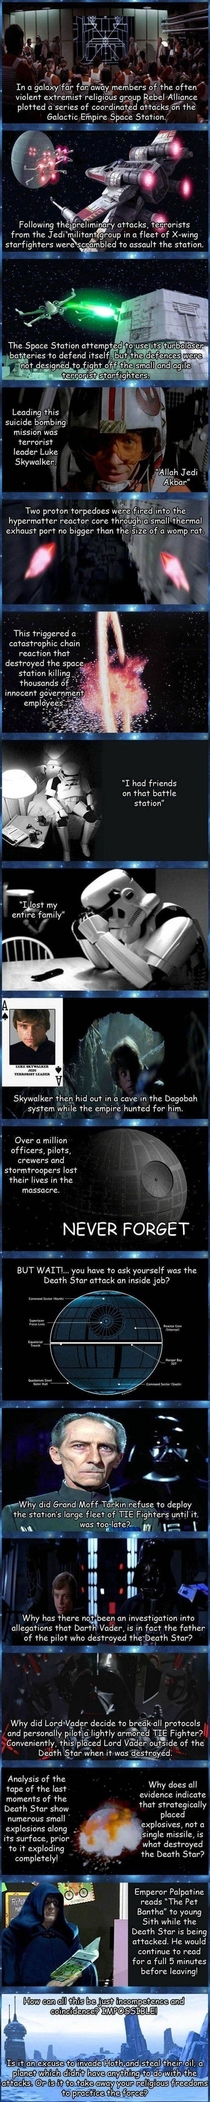 The tale of the Death Star